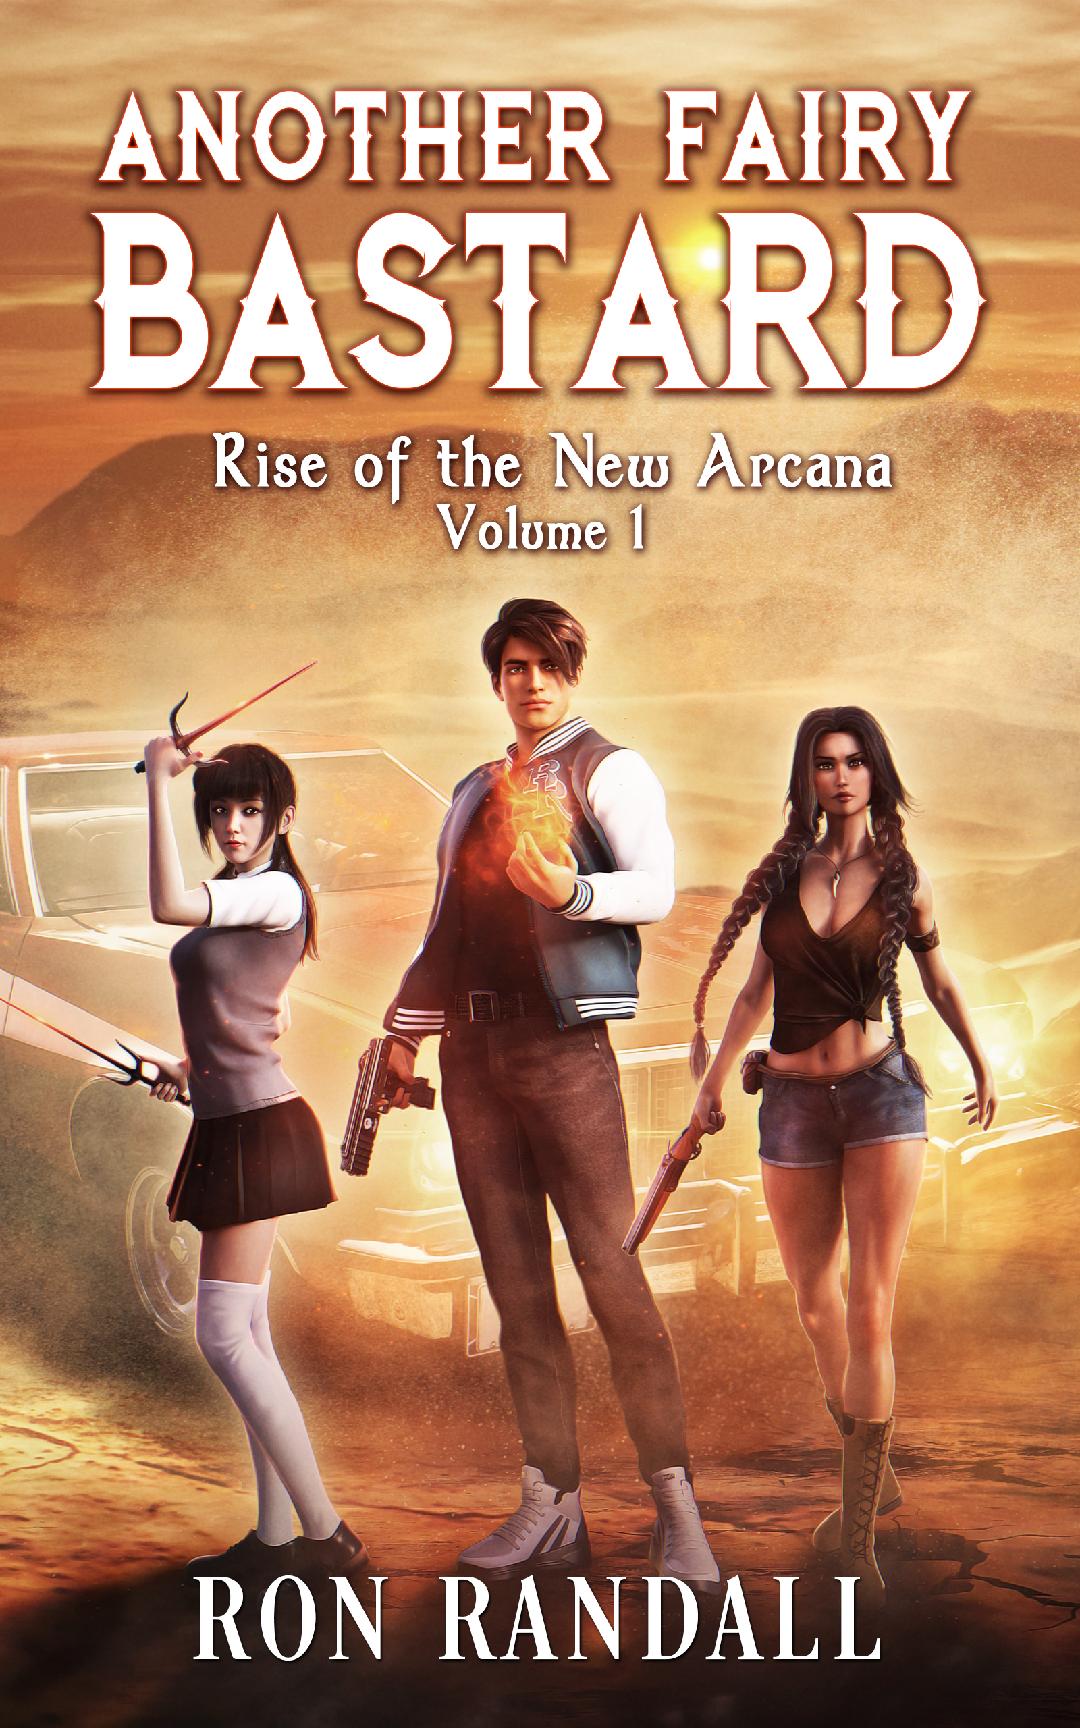 Tall young man with gun in one hand and a flame in the other, stands between a woman of Asian descent carrying a pair of Sais, and a Native American woman with a shotgun, in front of a car in the desert.